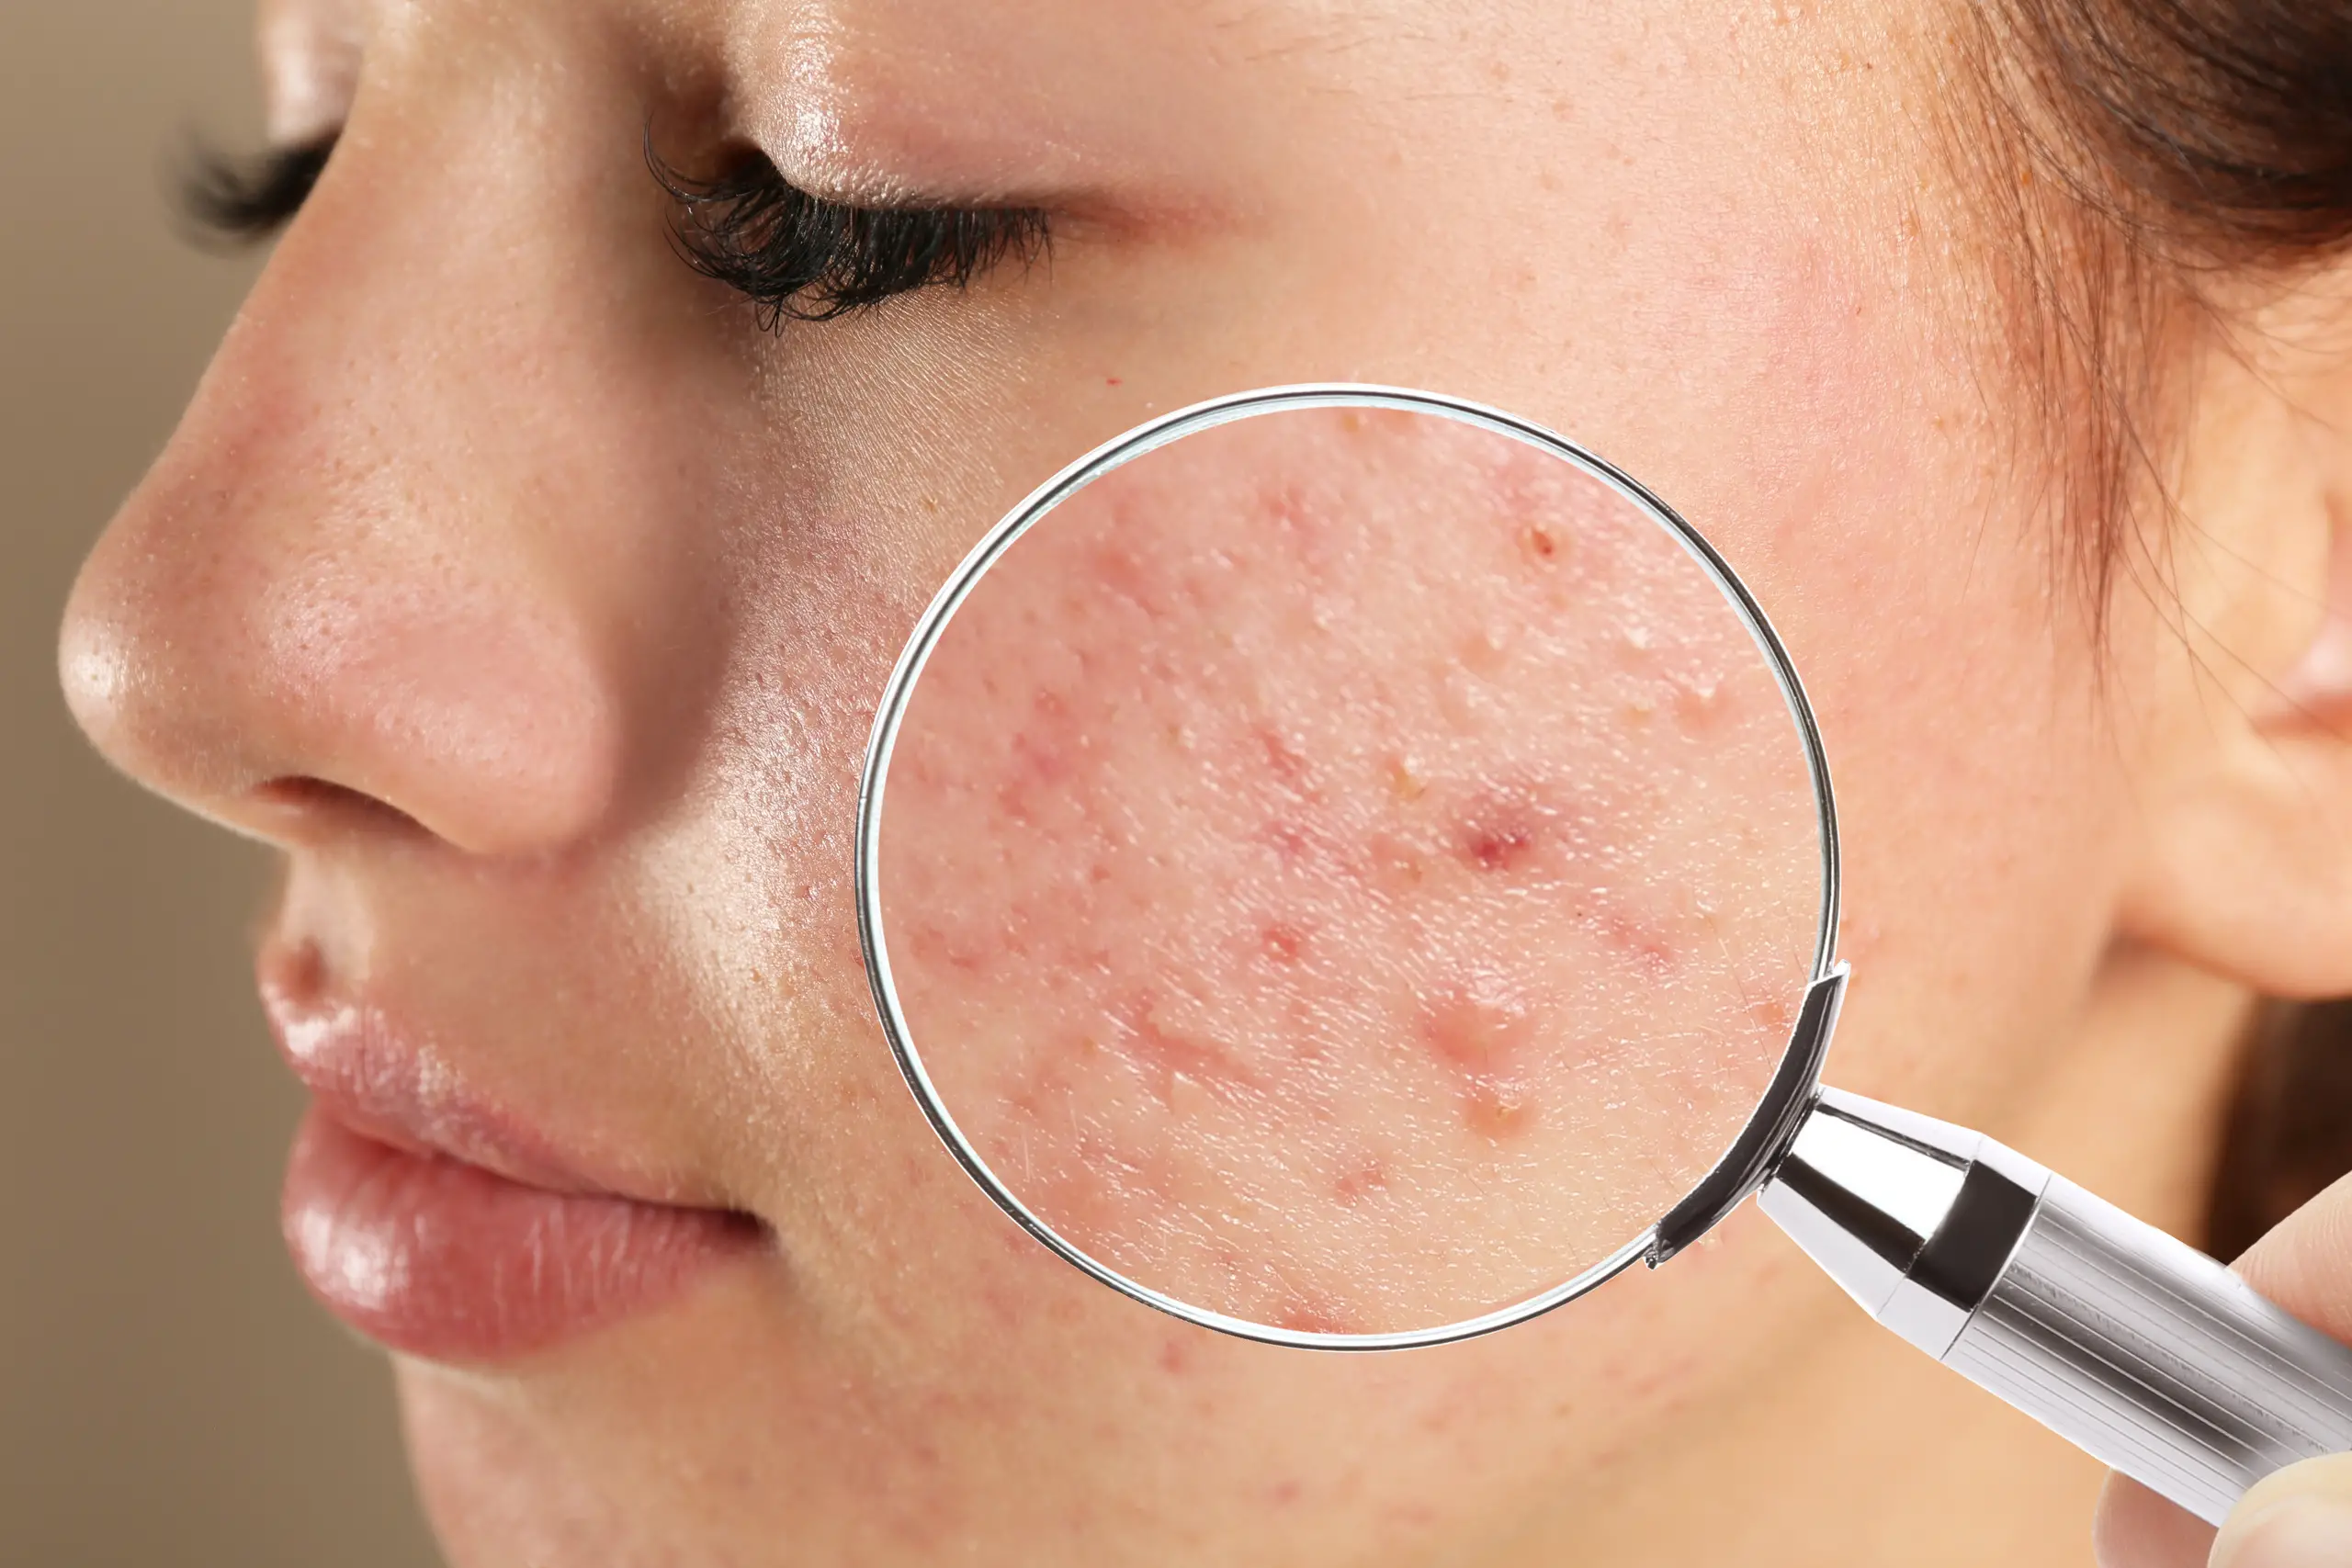 What Causes Facial Acne?